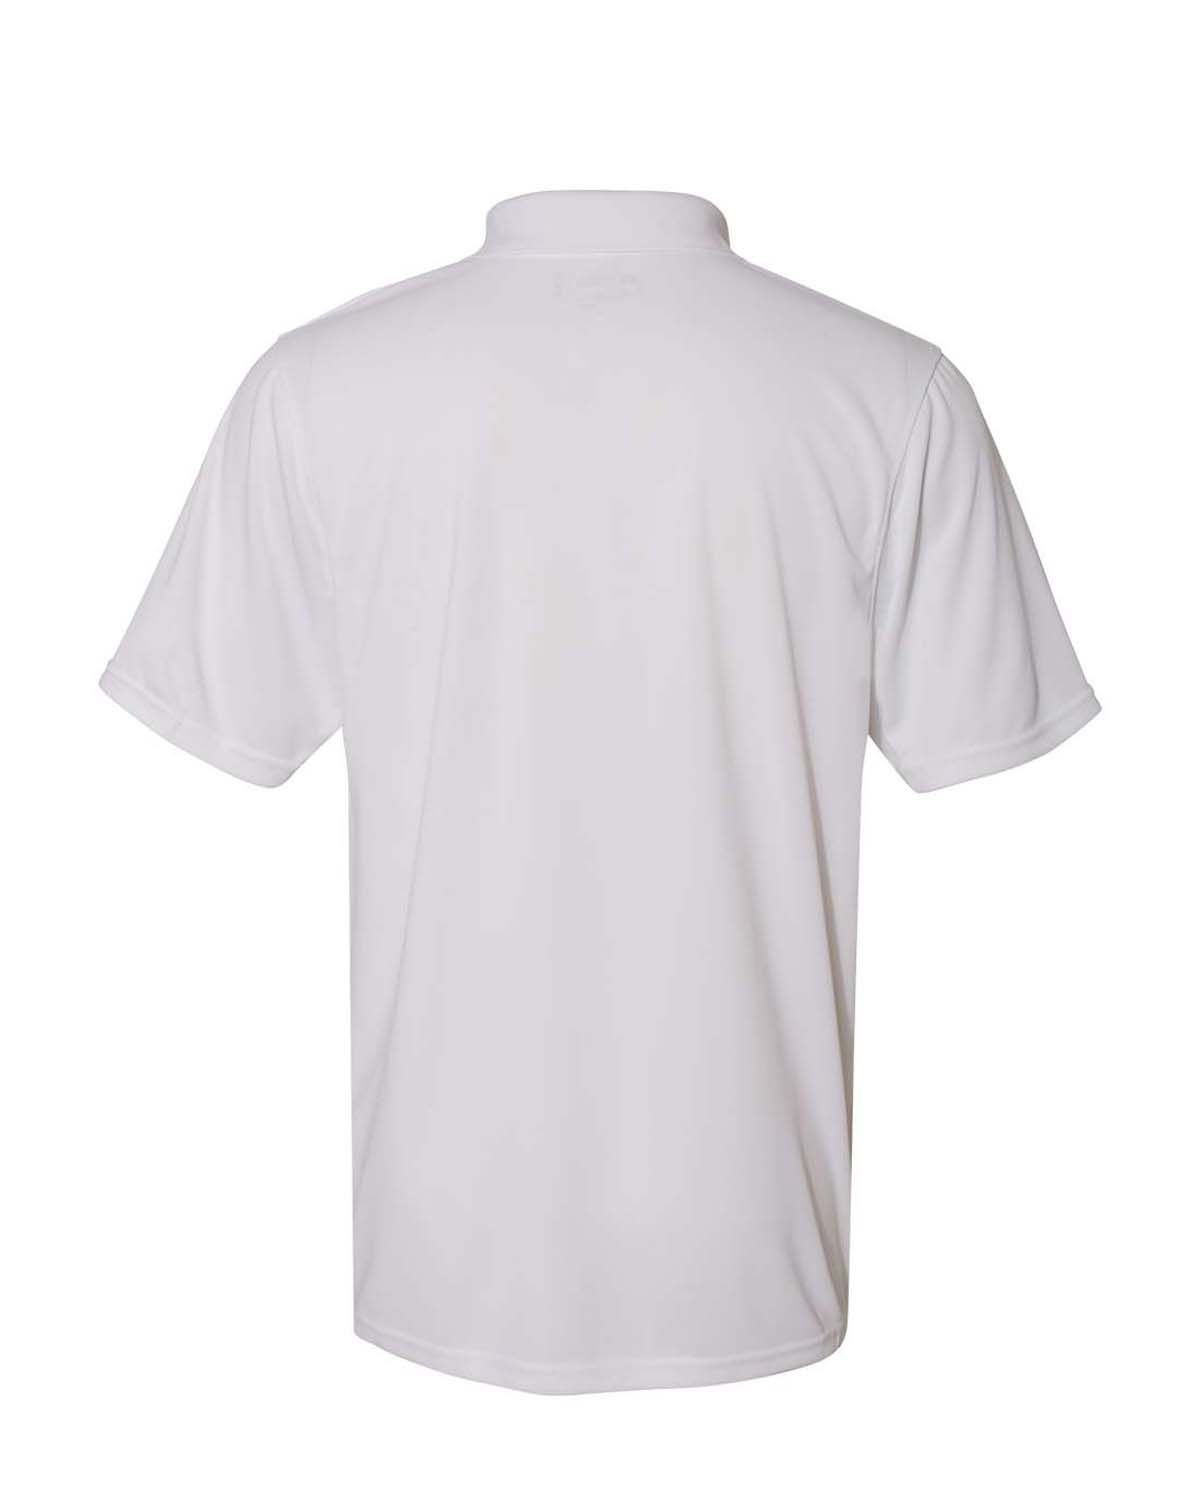 'Russell Athletic 7EPTUM Essential Short Sleeve Polo'